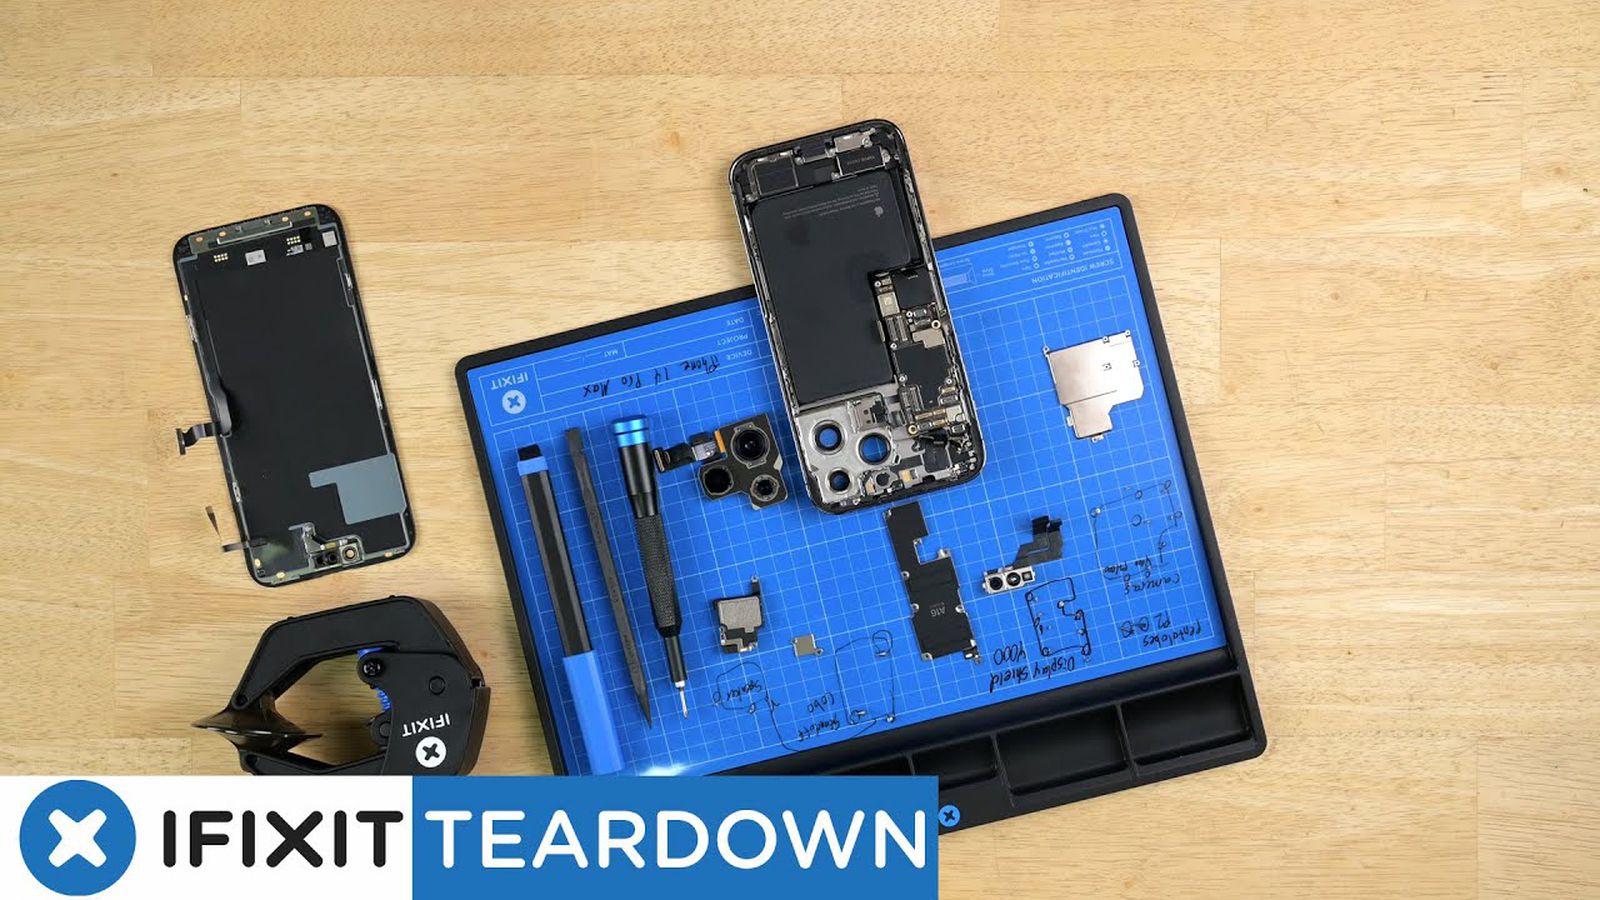 Repair website iFixit today shared an in-depth teardown of the iPhone 14 Pro Max, providing a closer look at the device's internals. Notably, the tear